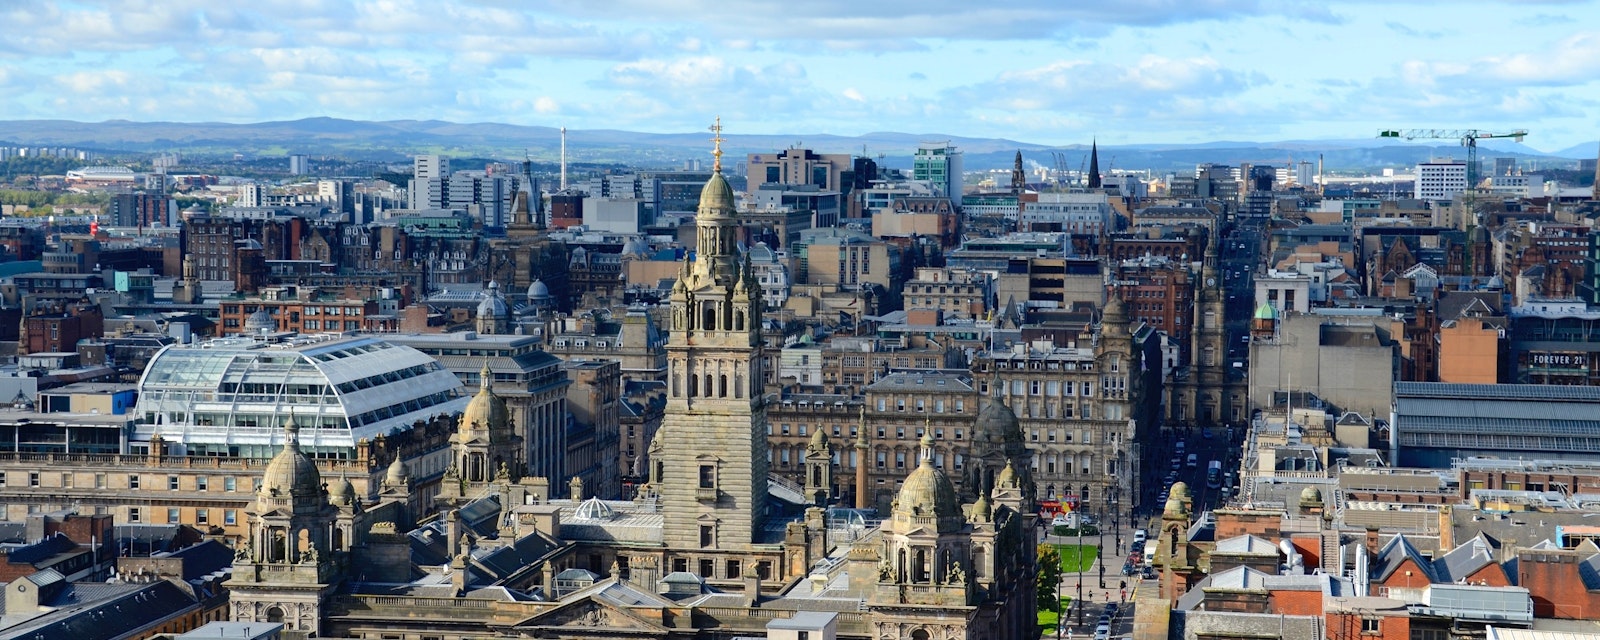 The,Glasgow,Skyline,Looking,Towards,George,Square,And,The,City